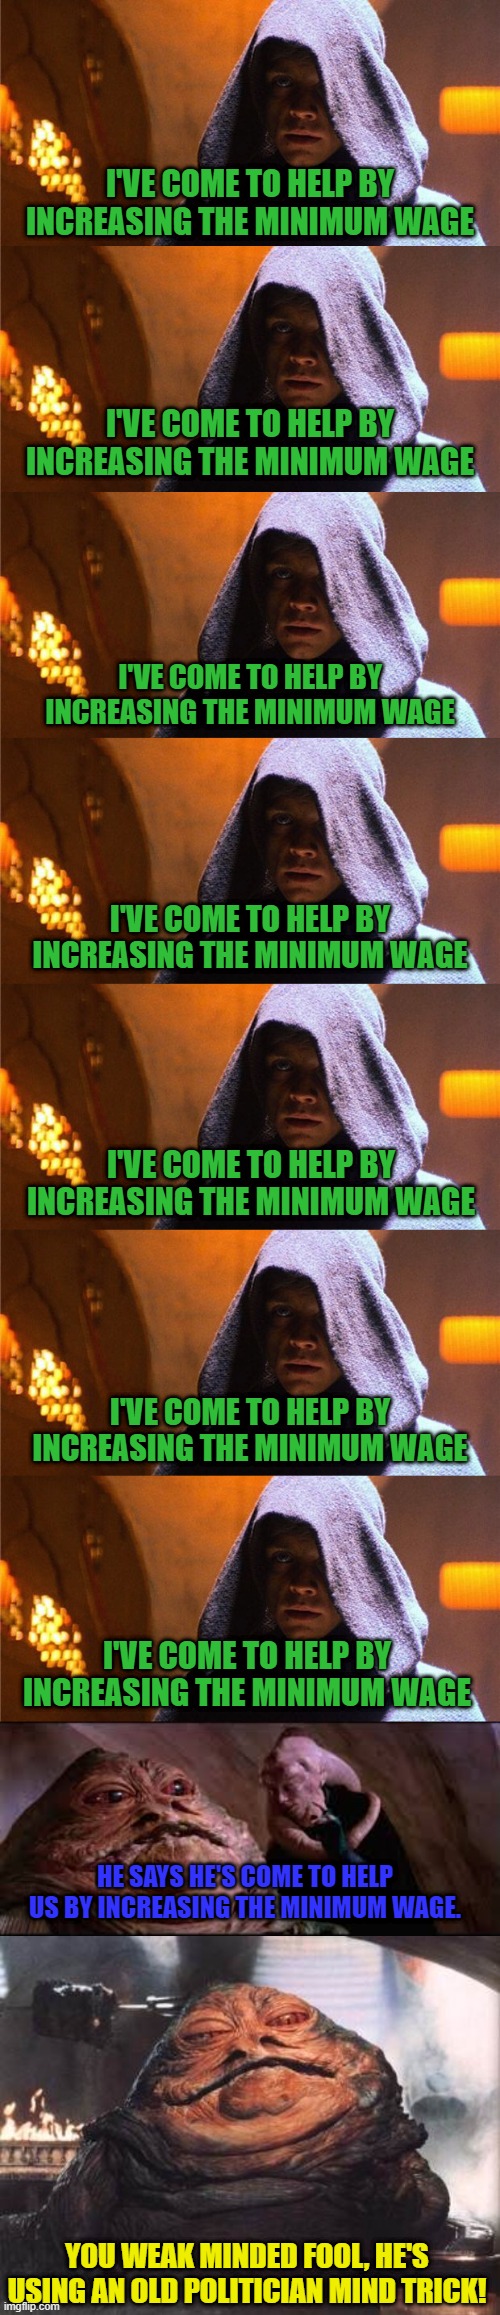 Just gotta say it seven times . . . | I'VE COME TO HELP BY INCREASING THE MINIMUM WAGE; I'VE COME TO HELP BY INCREASING THE MINIMUM WAGE; I'VE COME TO HELP BY INCREASING THE MINIMUM WAGE; I'VE COME TO HELP BY INCREASING THE MINIMUM WAGE; I'VE COME TO HELP BY INCREASING THE MINIMUM WAGE; I'VE COME TO HELP BY INCREASING THE MINIMUM WAGE; I'VE COME TO HELP BY INCREASING THE MINIMUM WAGE; HE SAYS HE'S COME TO HELP US BY INCREASING THE MINIMUM WAGE. YOU WEAK MINDED FOOL, HE'S USING AN OLD POLITICIAN MIND TRICK! | image tagged in minimum wage,weak minded fool | made w/ Imgflip meme maker